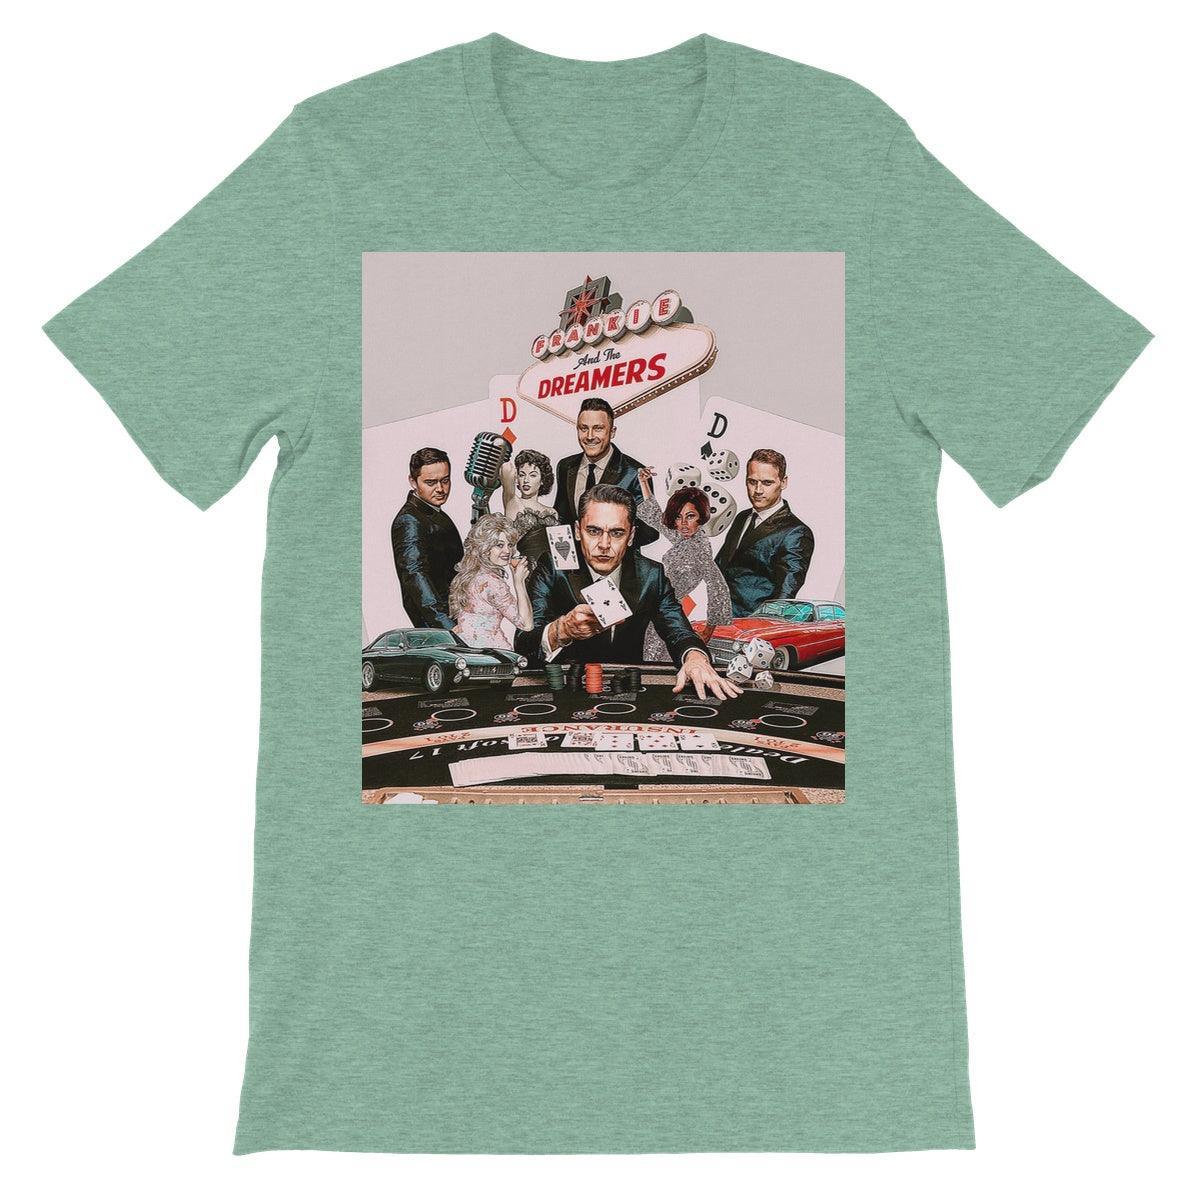 Frankie And The Dreamers Casino Unisex Short Sleeve T-Shirt | Apparel Heather Mint